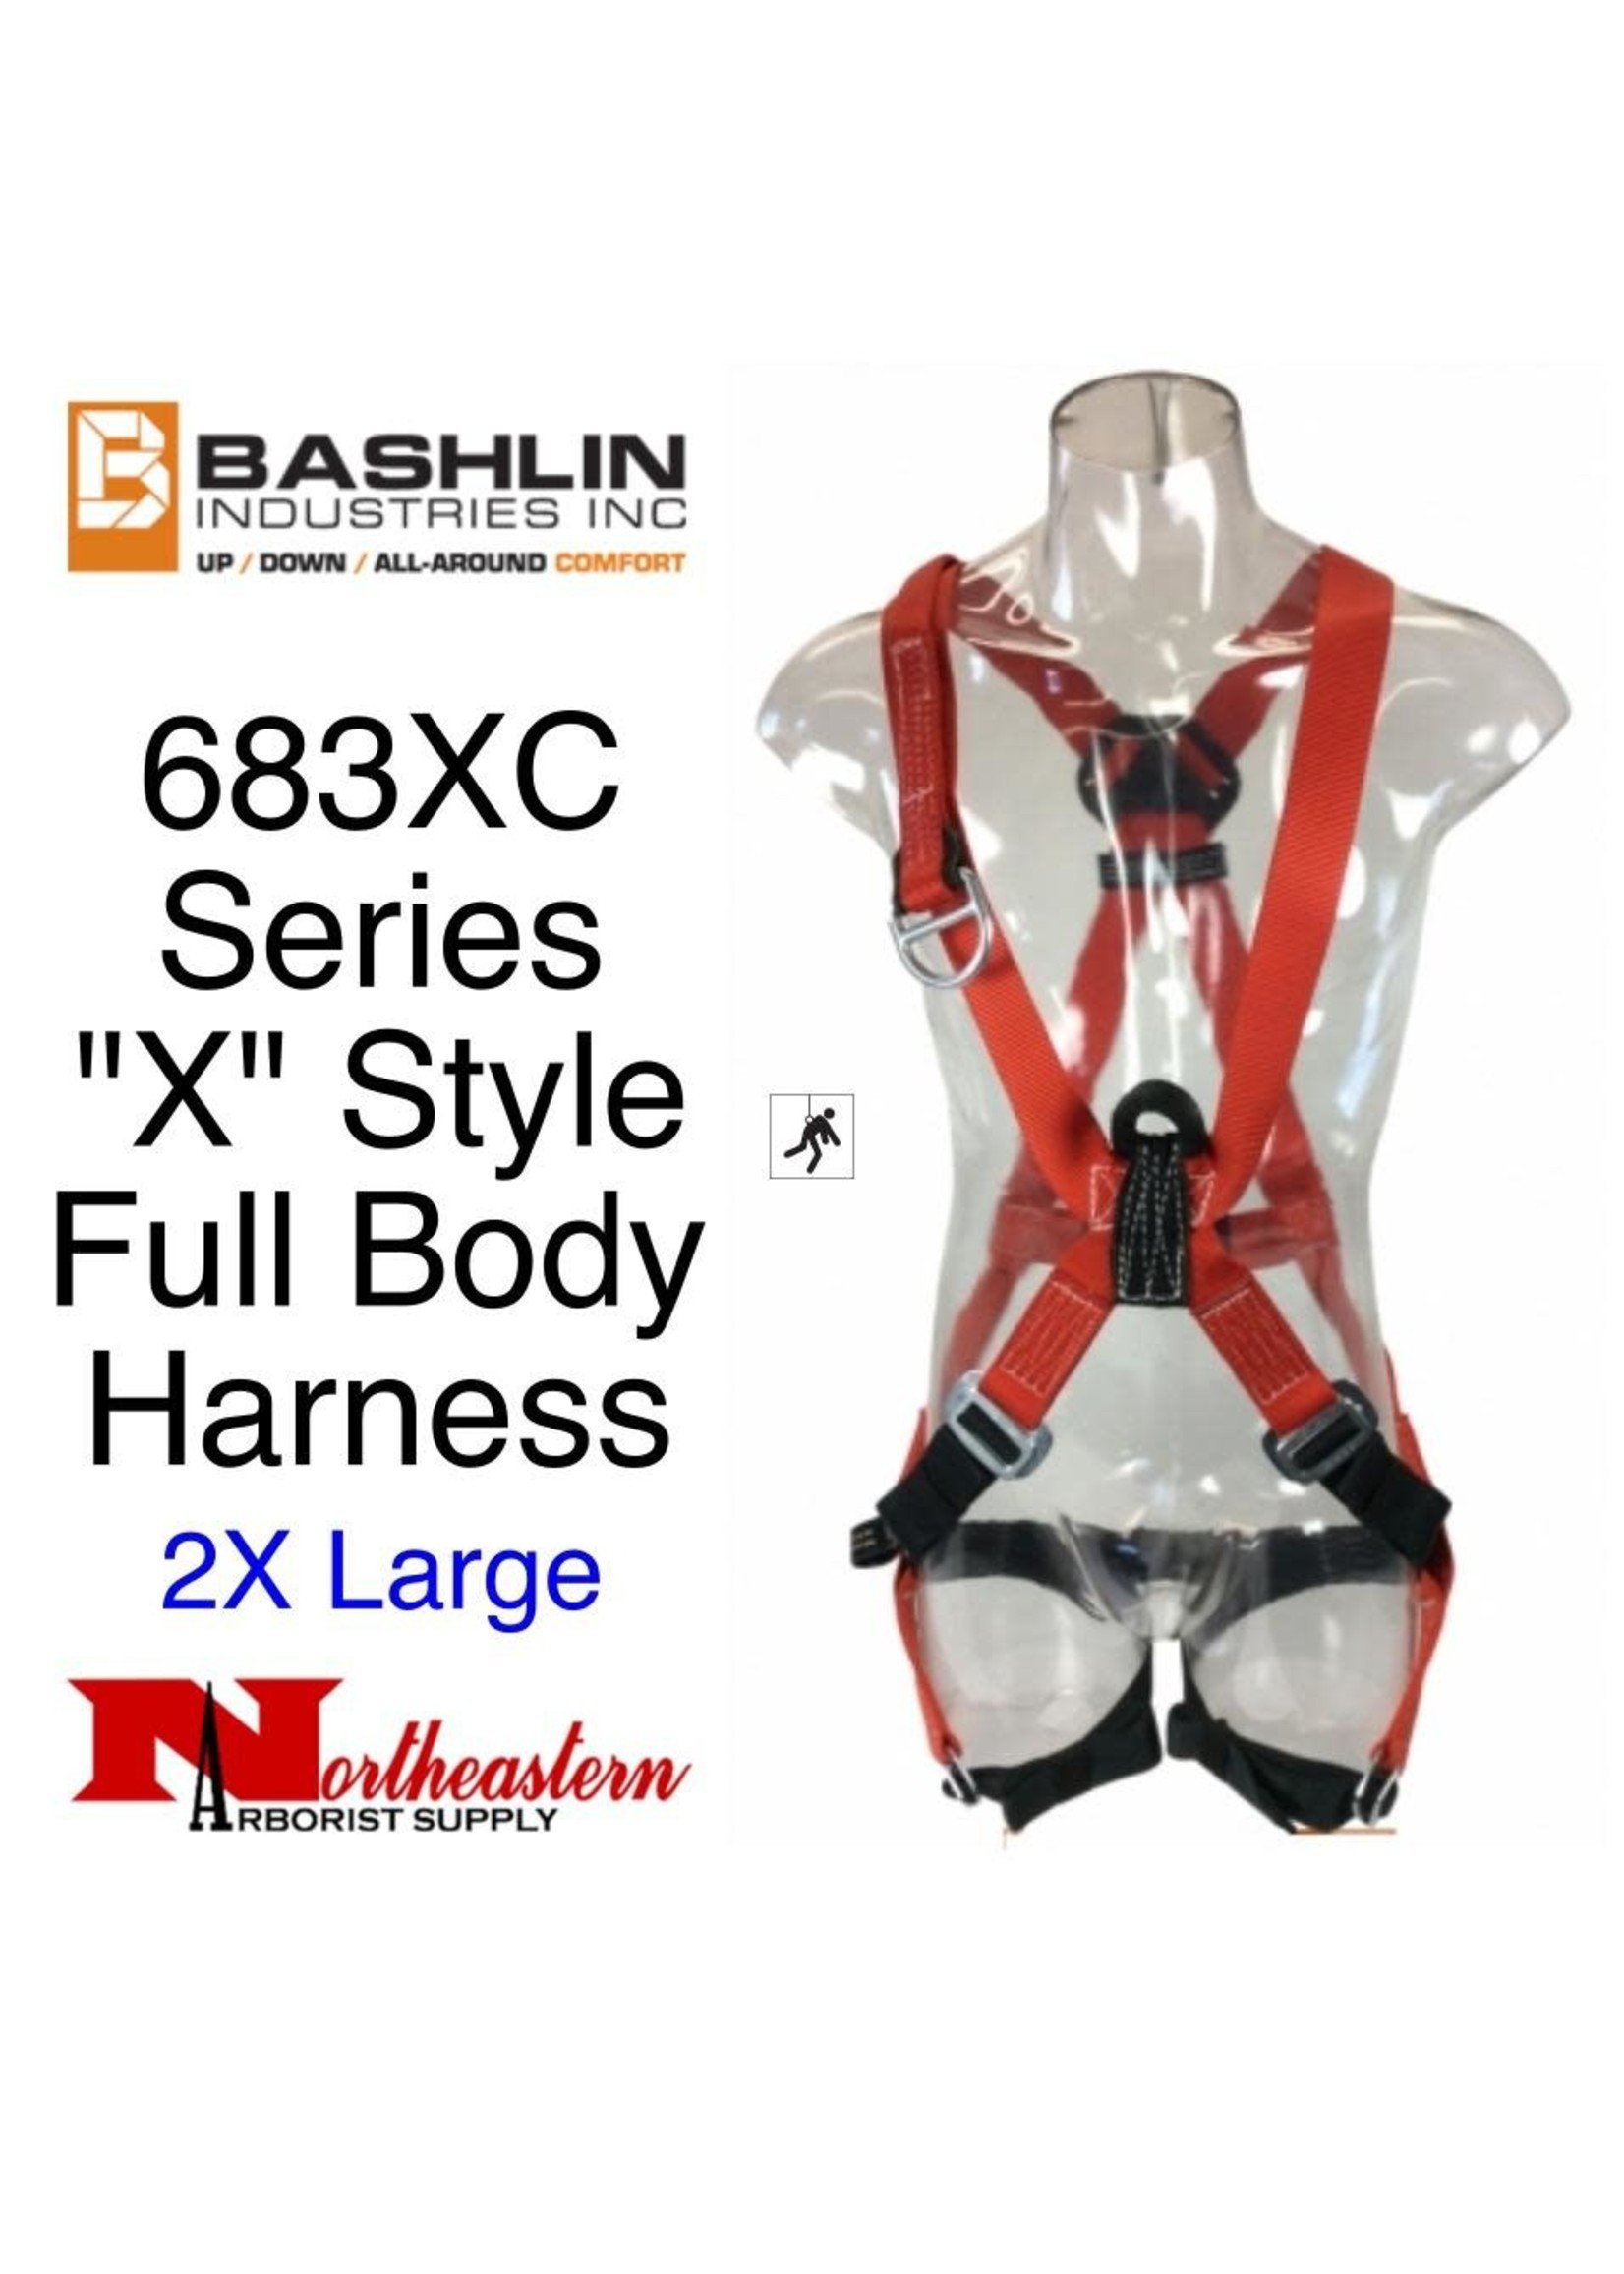 Bashlin FULL BODY HARNESS “X” style full body harness with 24” nylon back attachment and D-ring (“C" attachment).